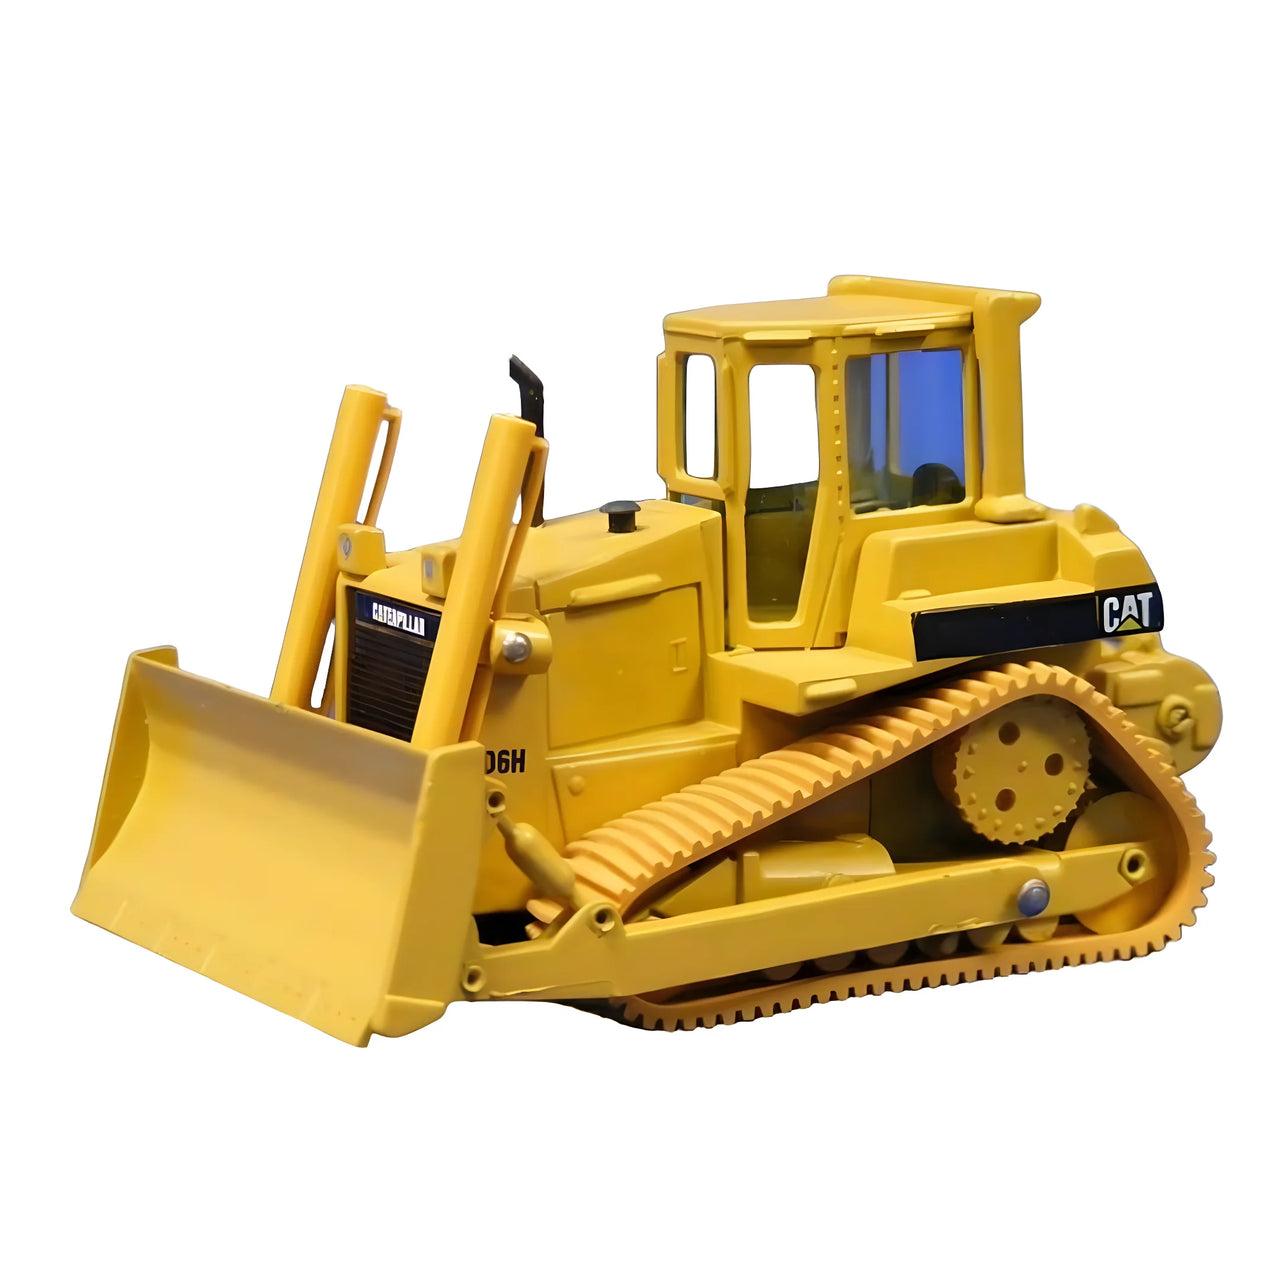 2851W Caterpillar D6H Crawler Tractor Scale 1:50 (Discontinued Model)